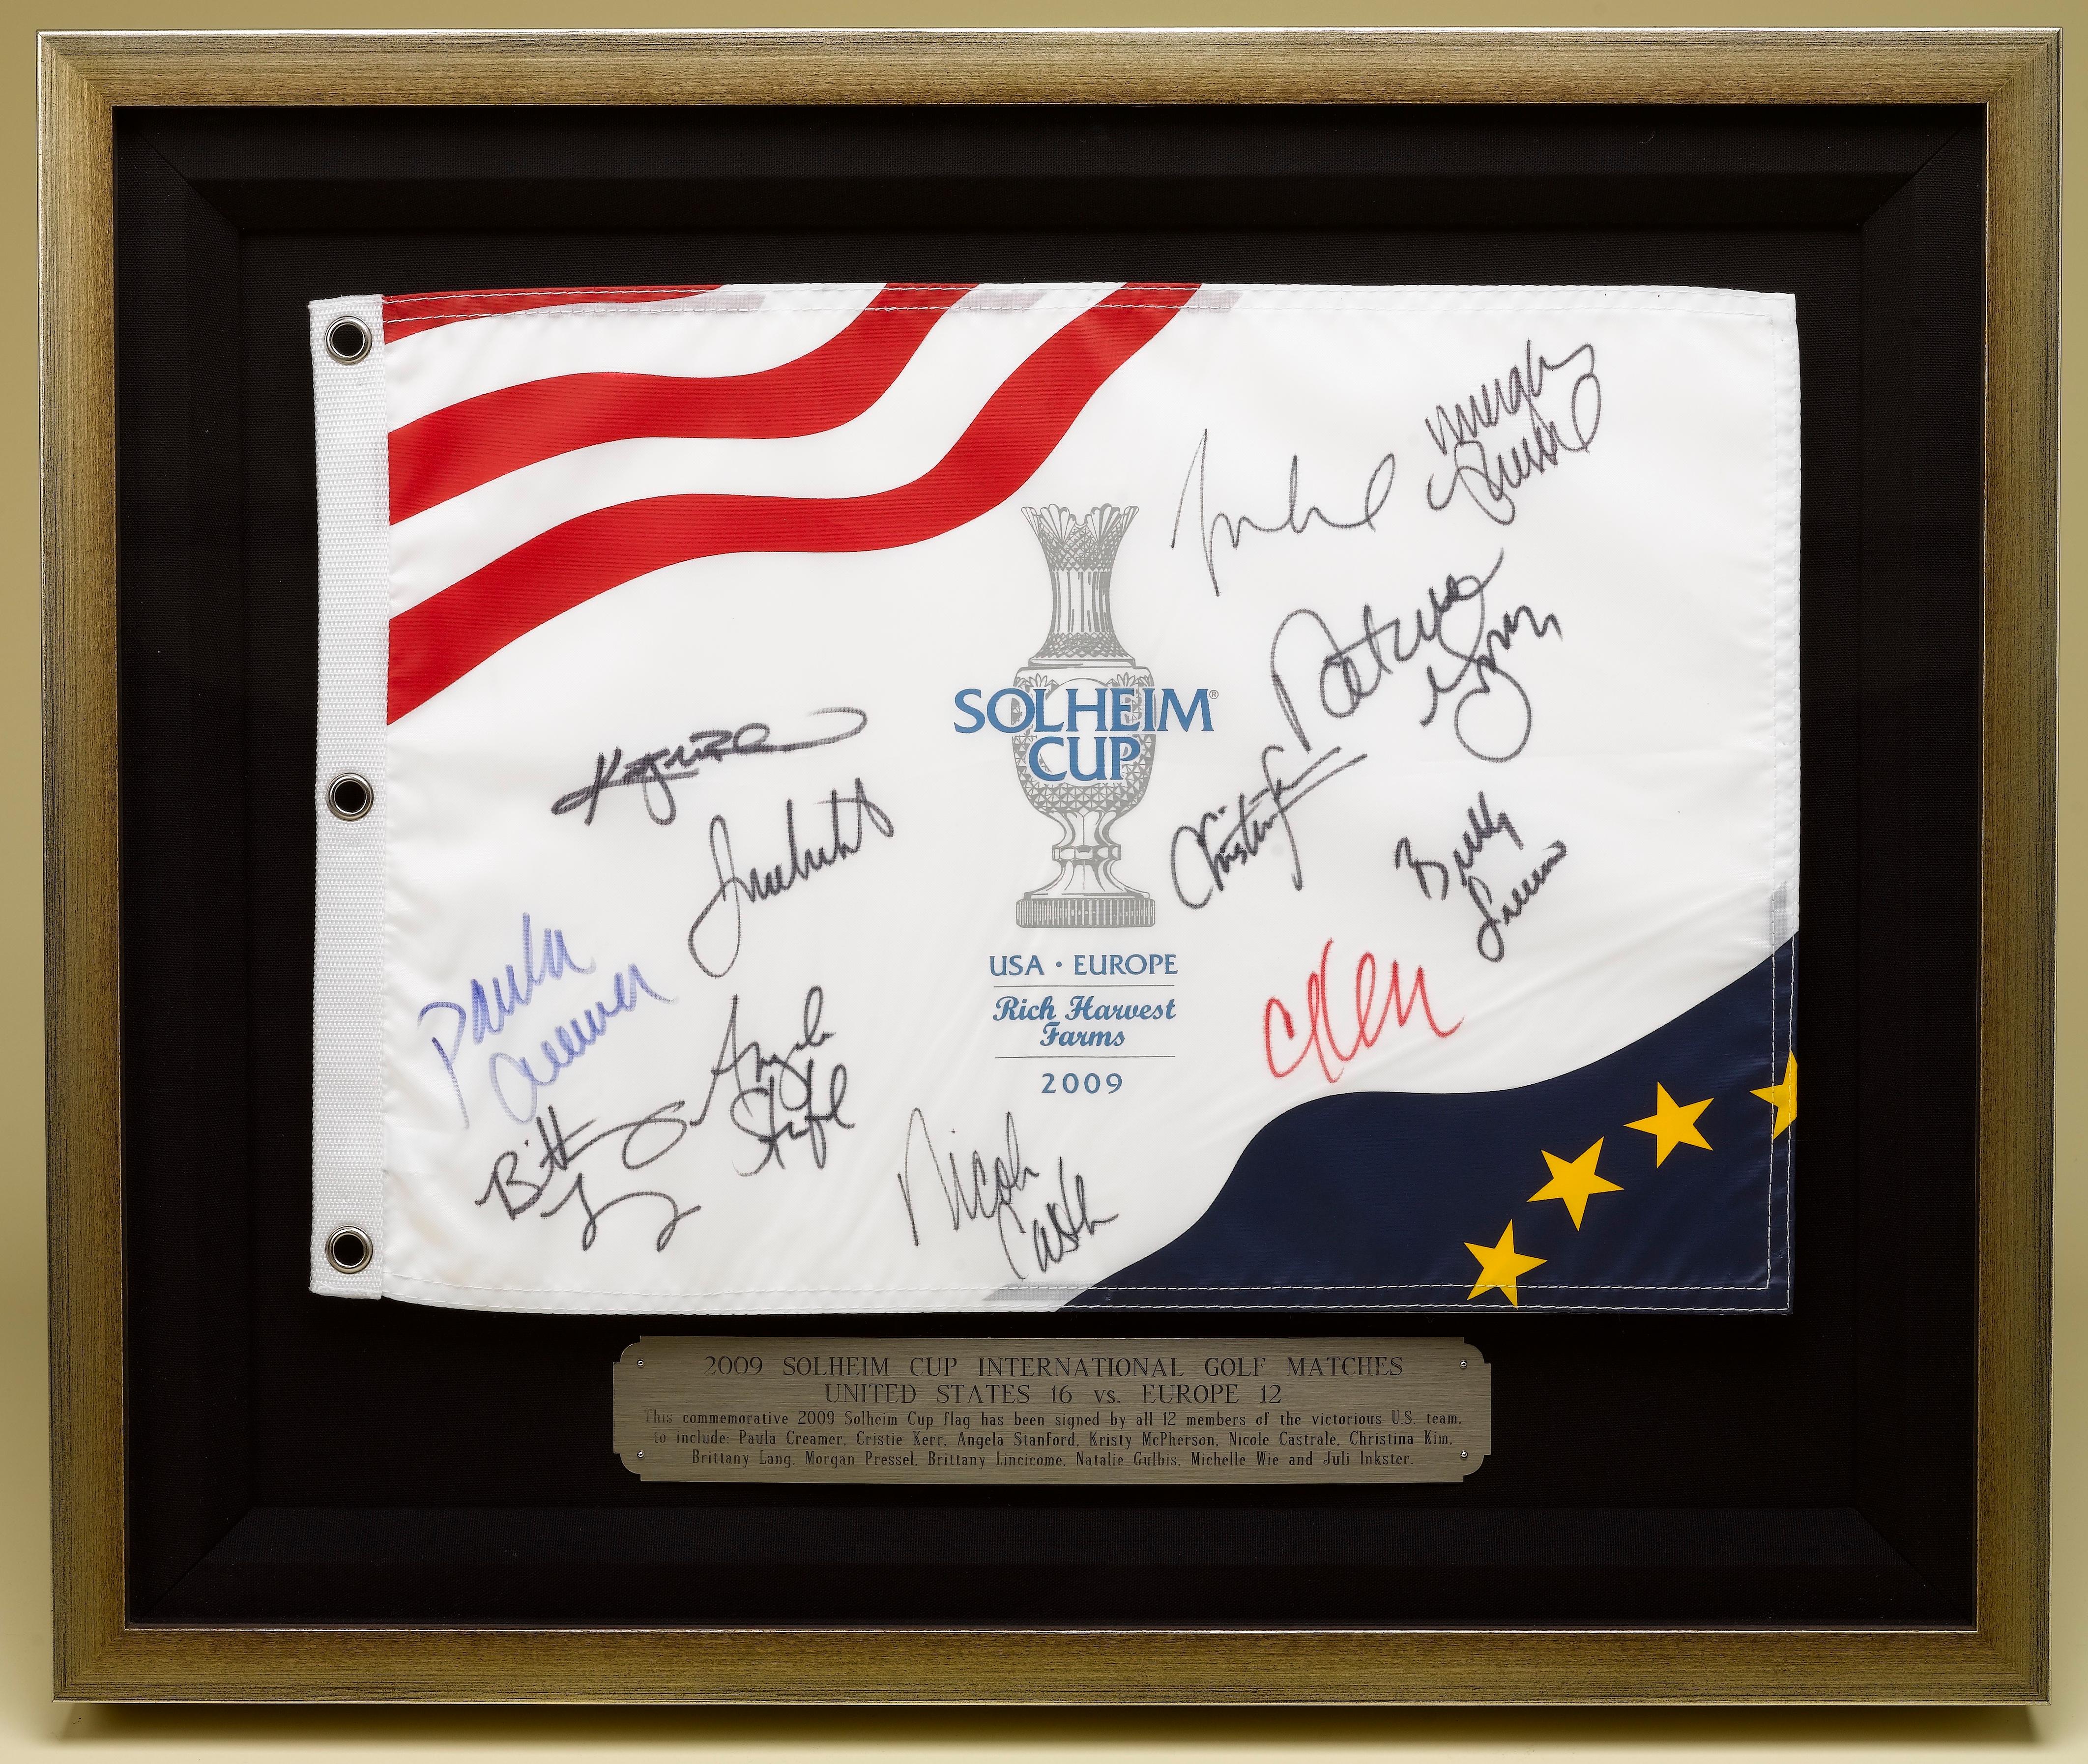 Presented is an autographed collage celebrating the women golfers of the 2009 Solheim Cup U.S. team. The 11th Solheim Cup Matches were held August 21–23, 2009 at Rich Harvest Farms in Sugar Grove, Illinois. The biennial Solheim Cup matches are a